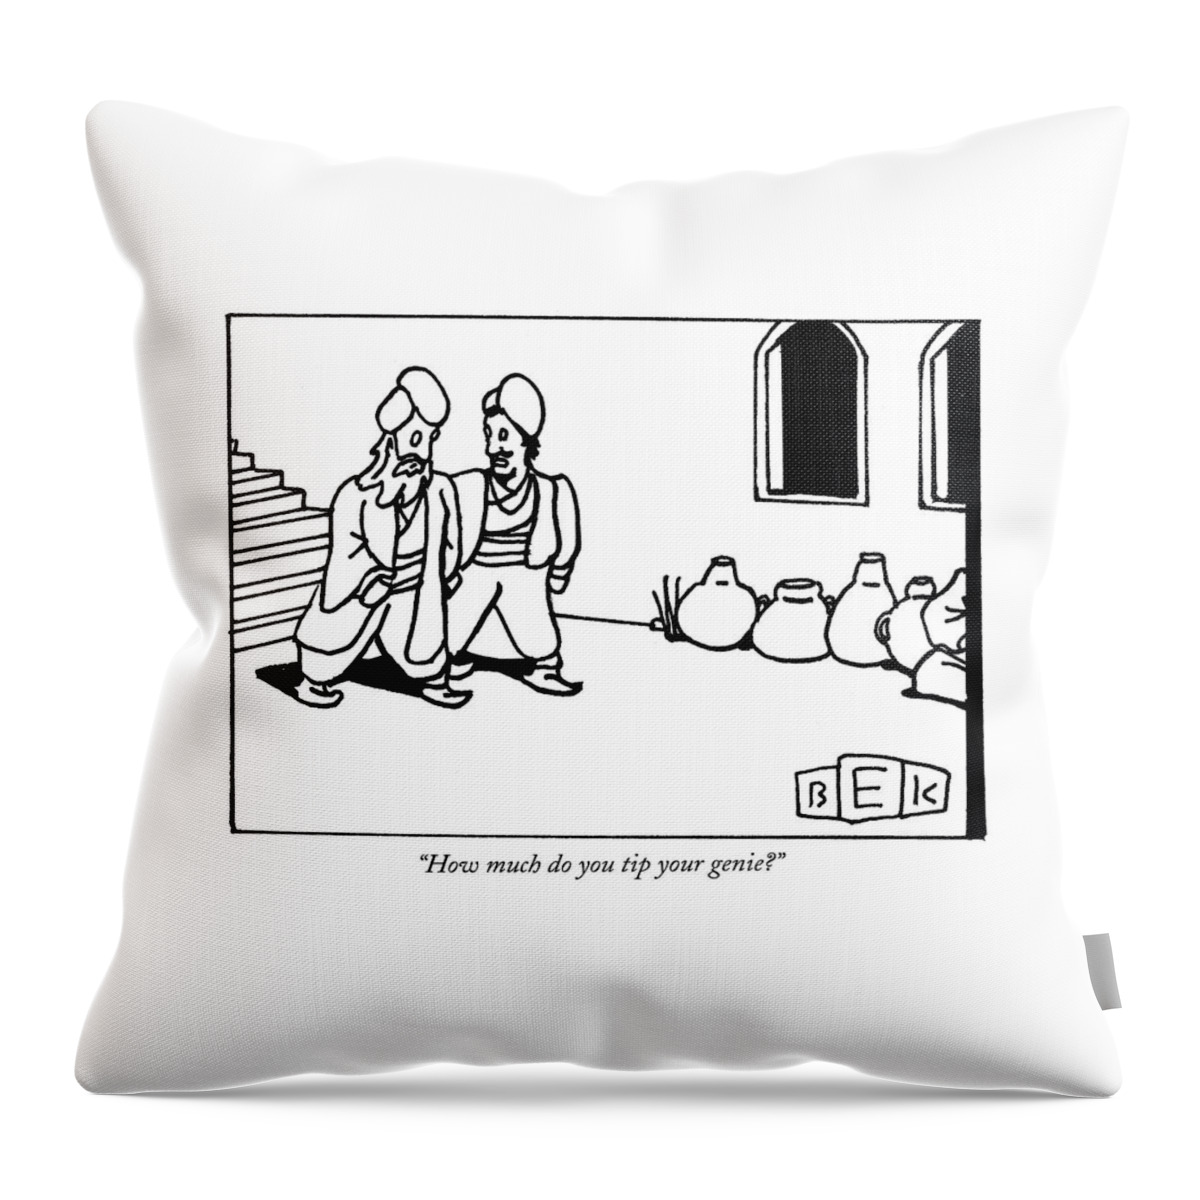 How Much Do You Tip Your Genie? Throw Pillow